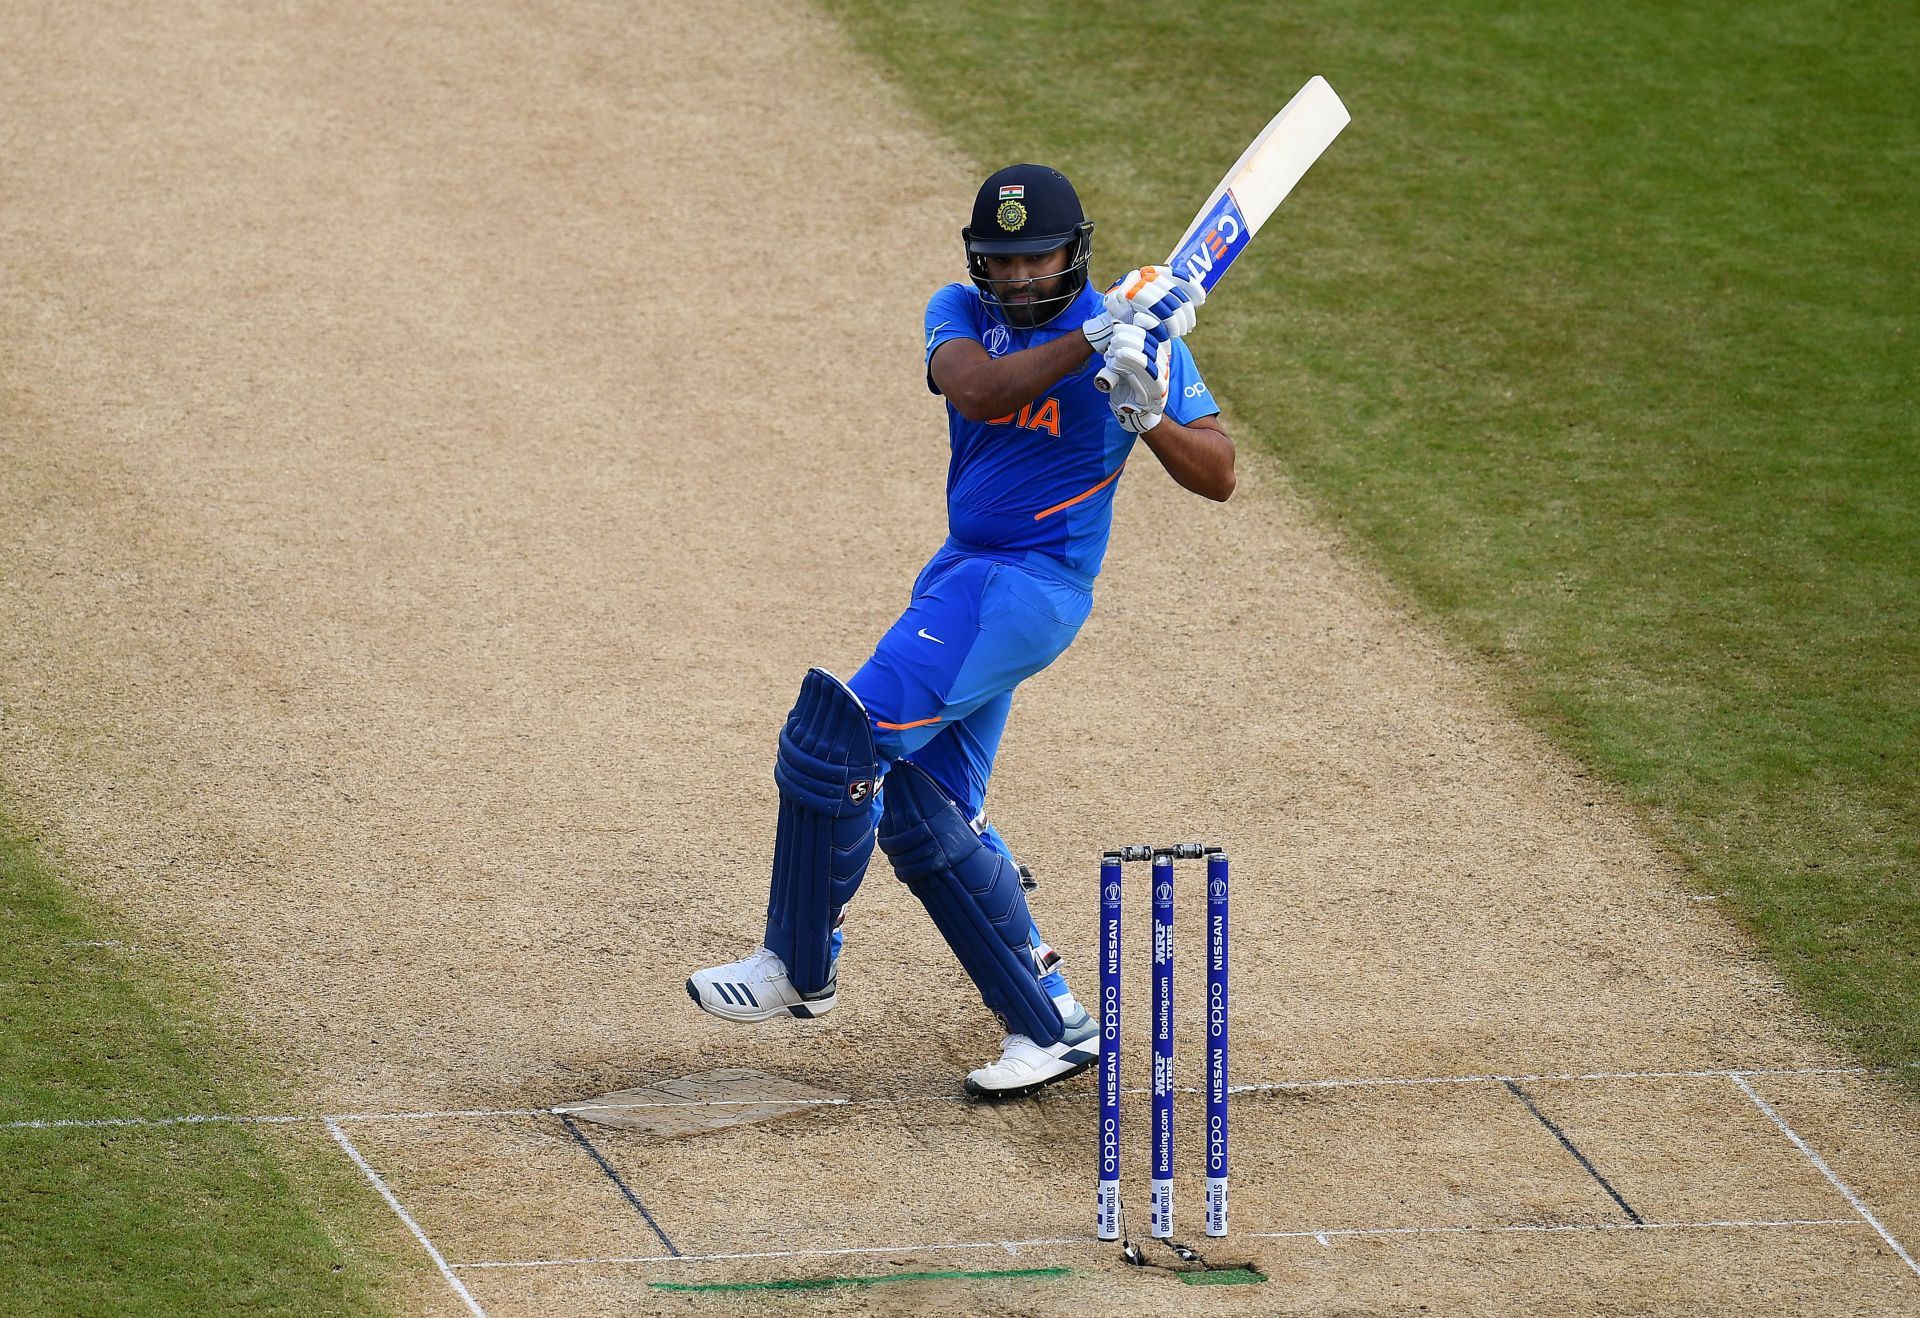 Rohit Sharma pulverizing bowling attacks - an example of the amazing ability at his disposal (File Image)